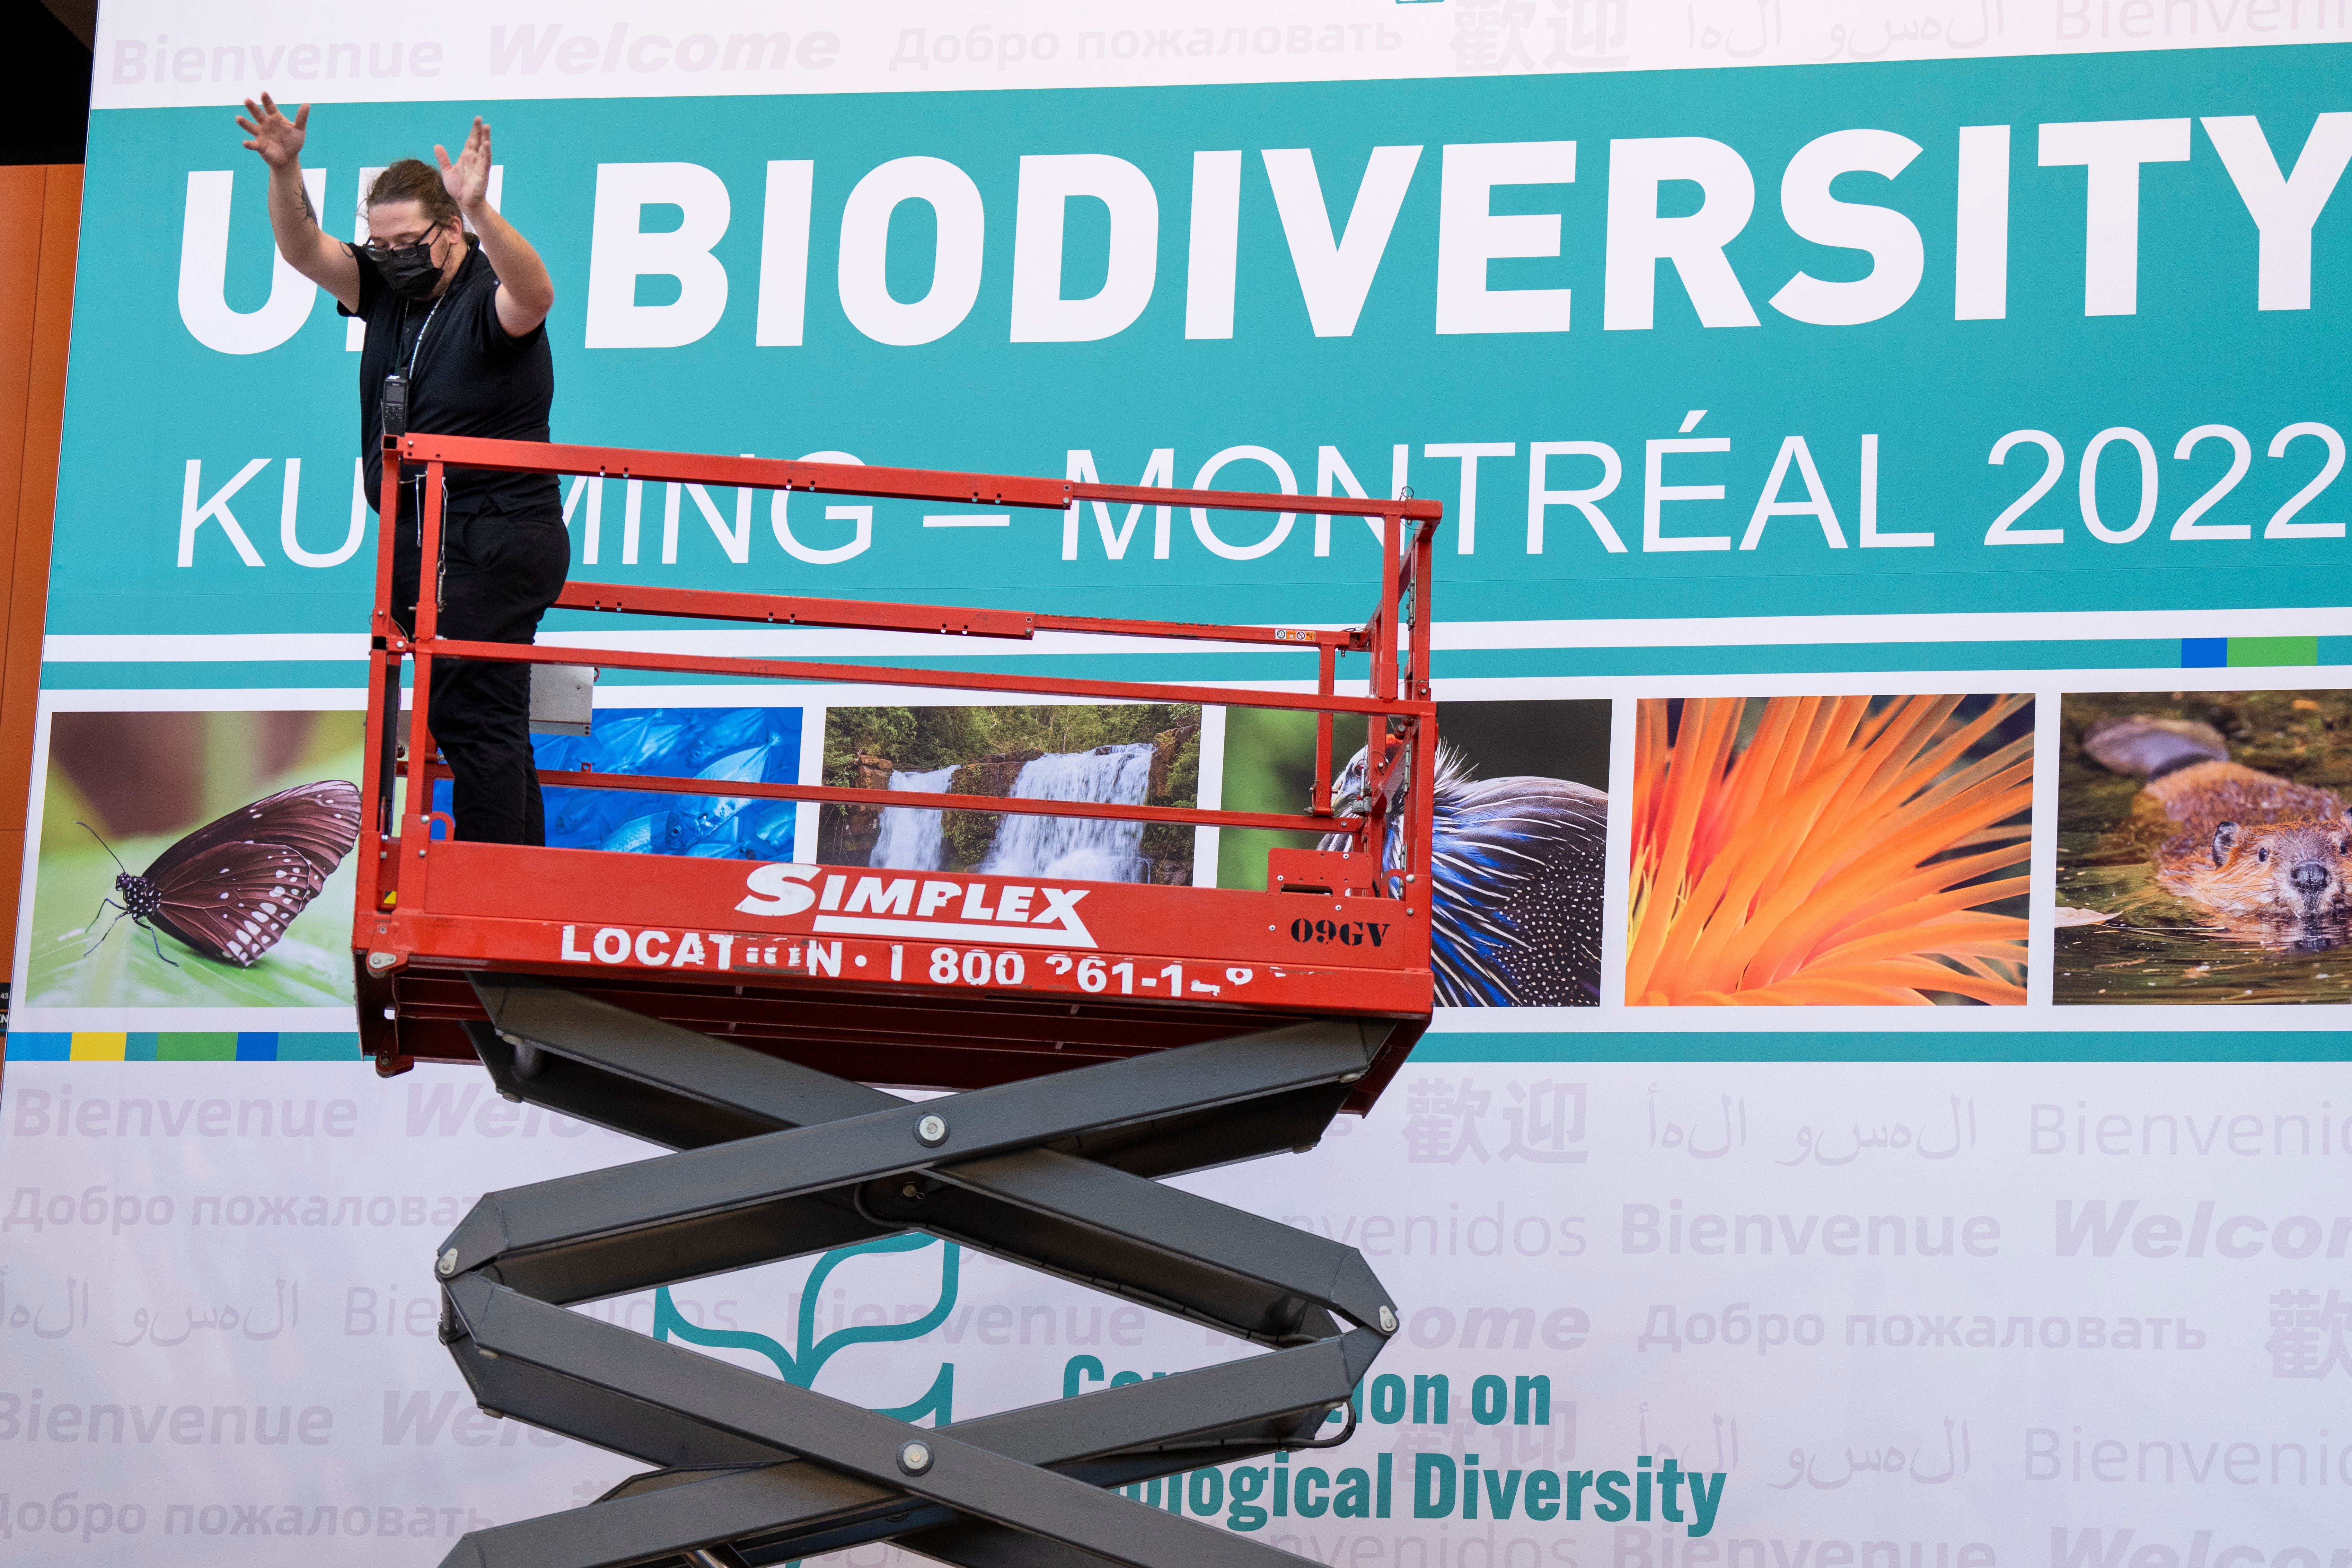 Workers set up the Montreal Convention Centre in preparation for the Cop15 UN conference on biodiversity in Montreal (Paul Chiasson/The Canadian Press via AP)